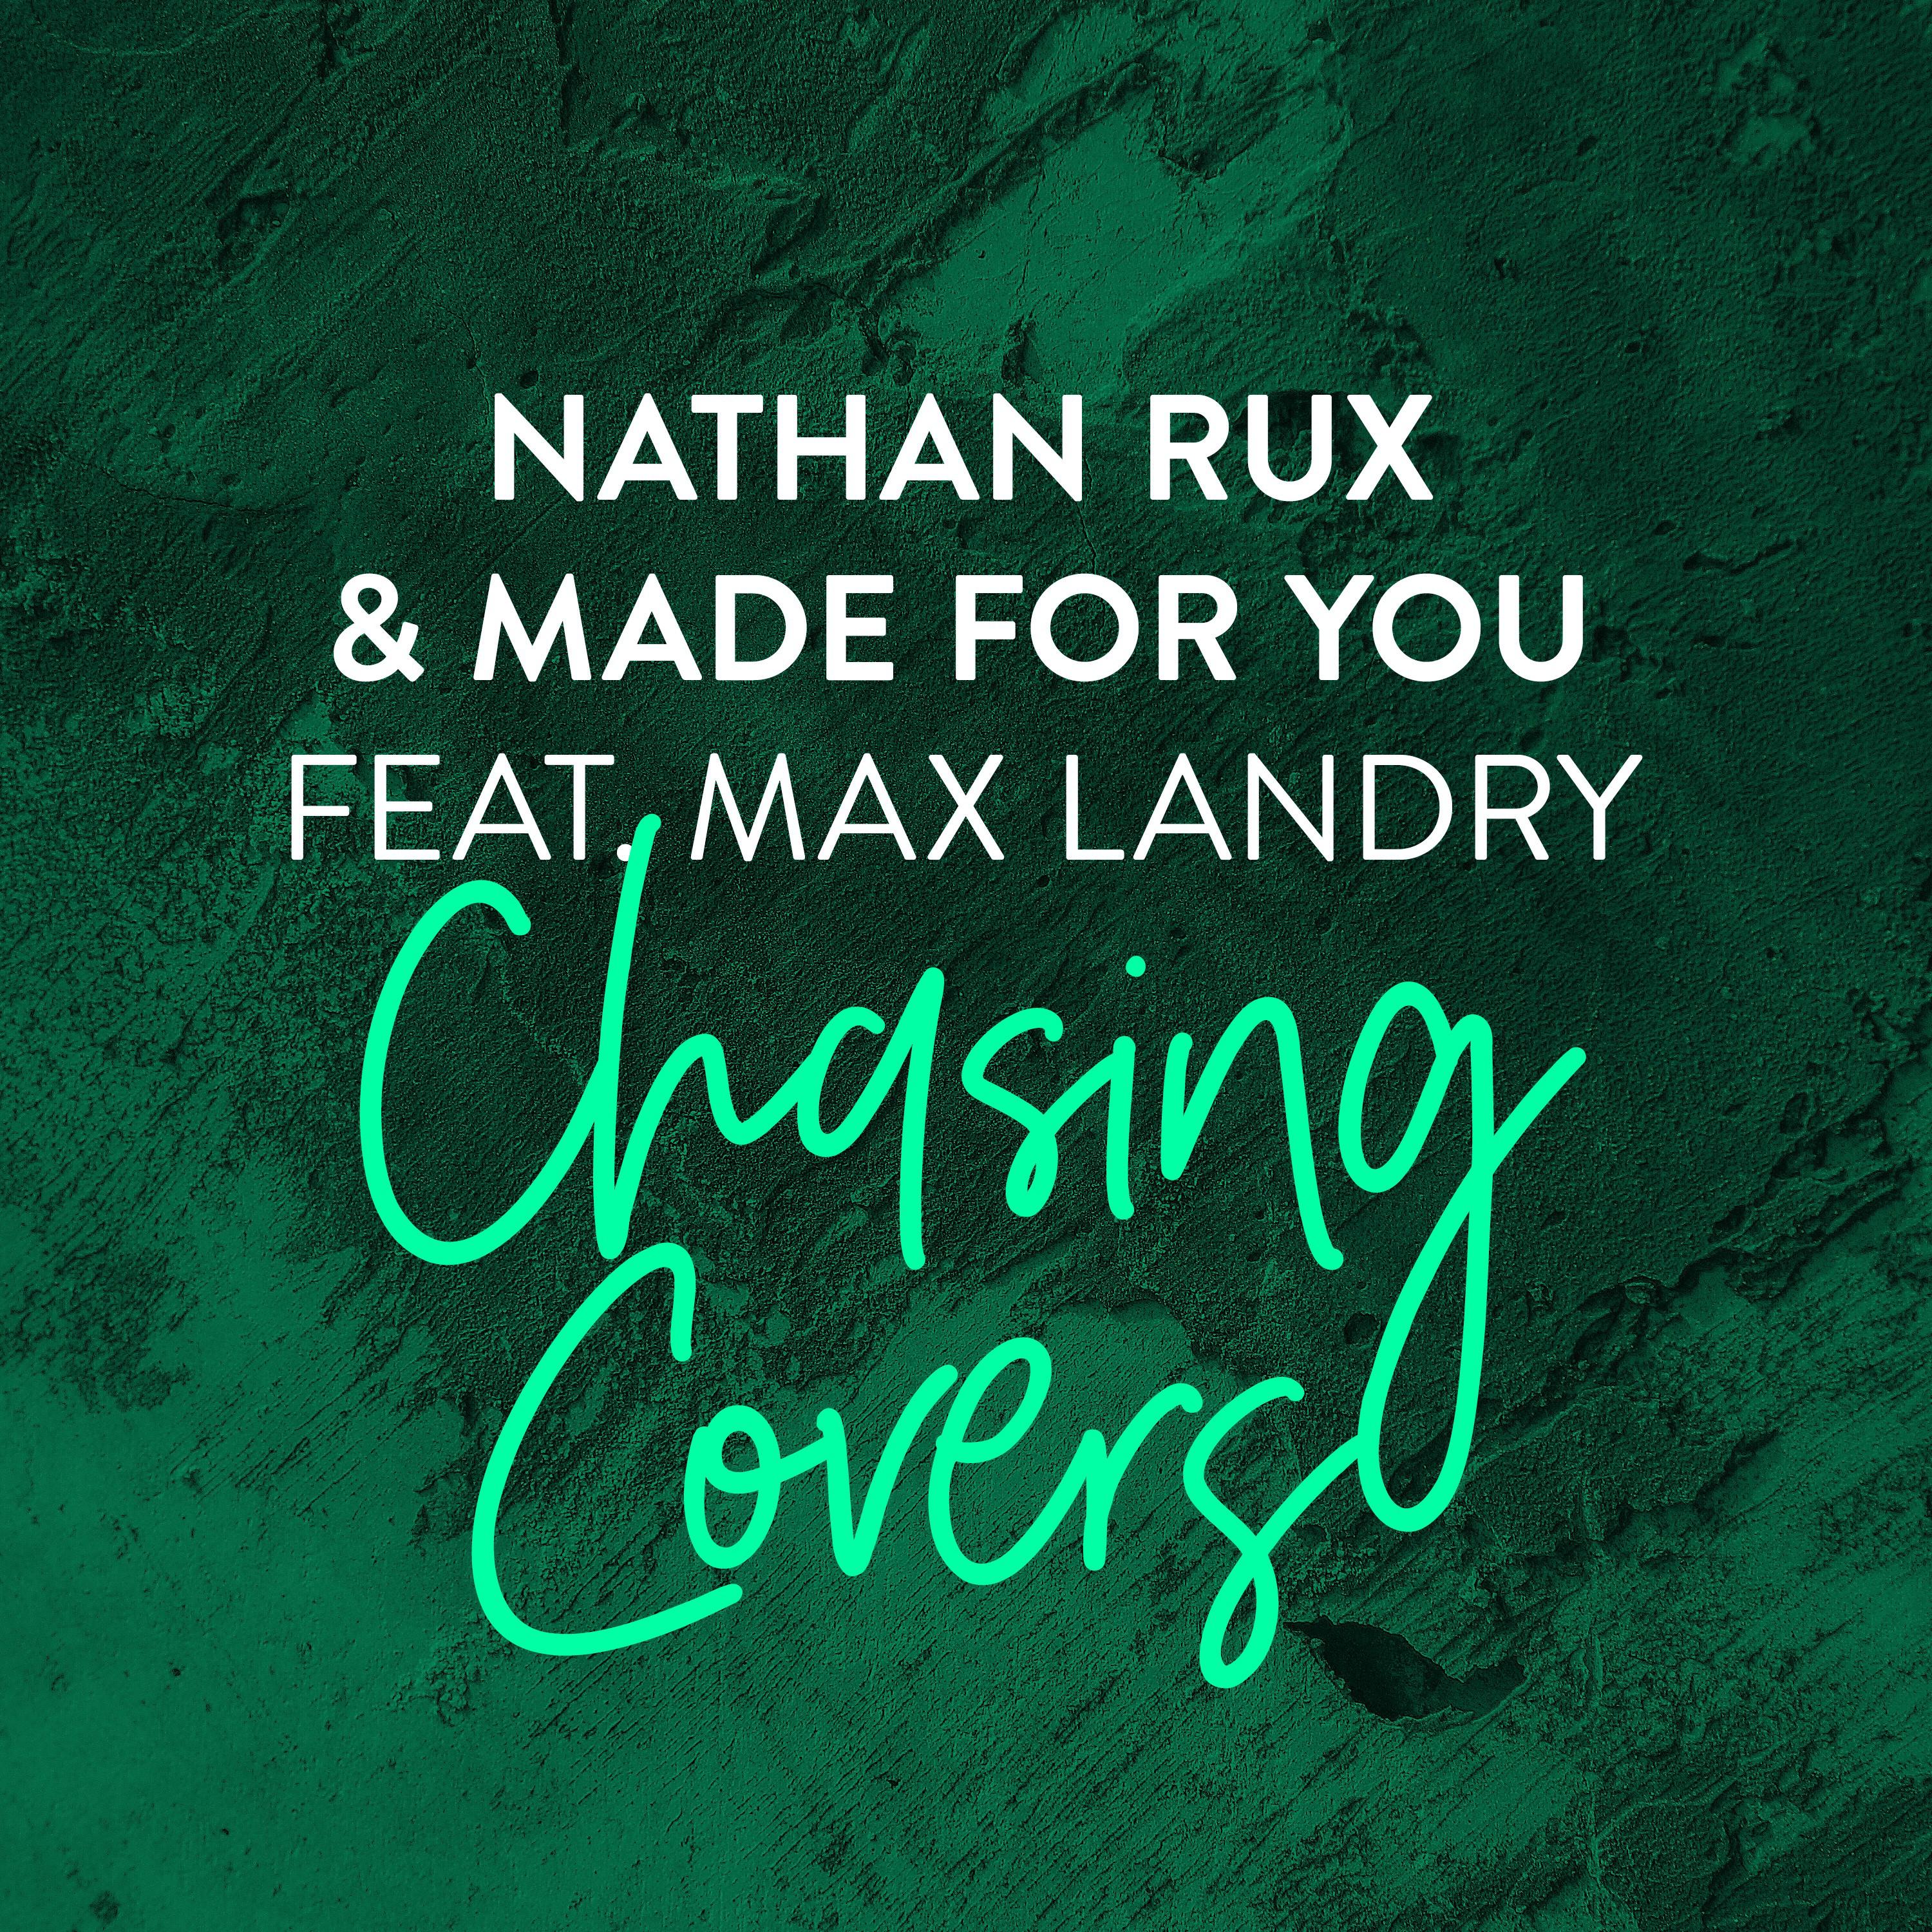 Nathan Rux - Chasing Covers